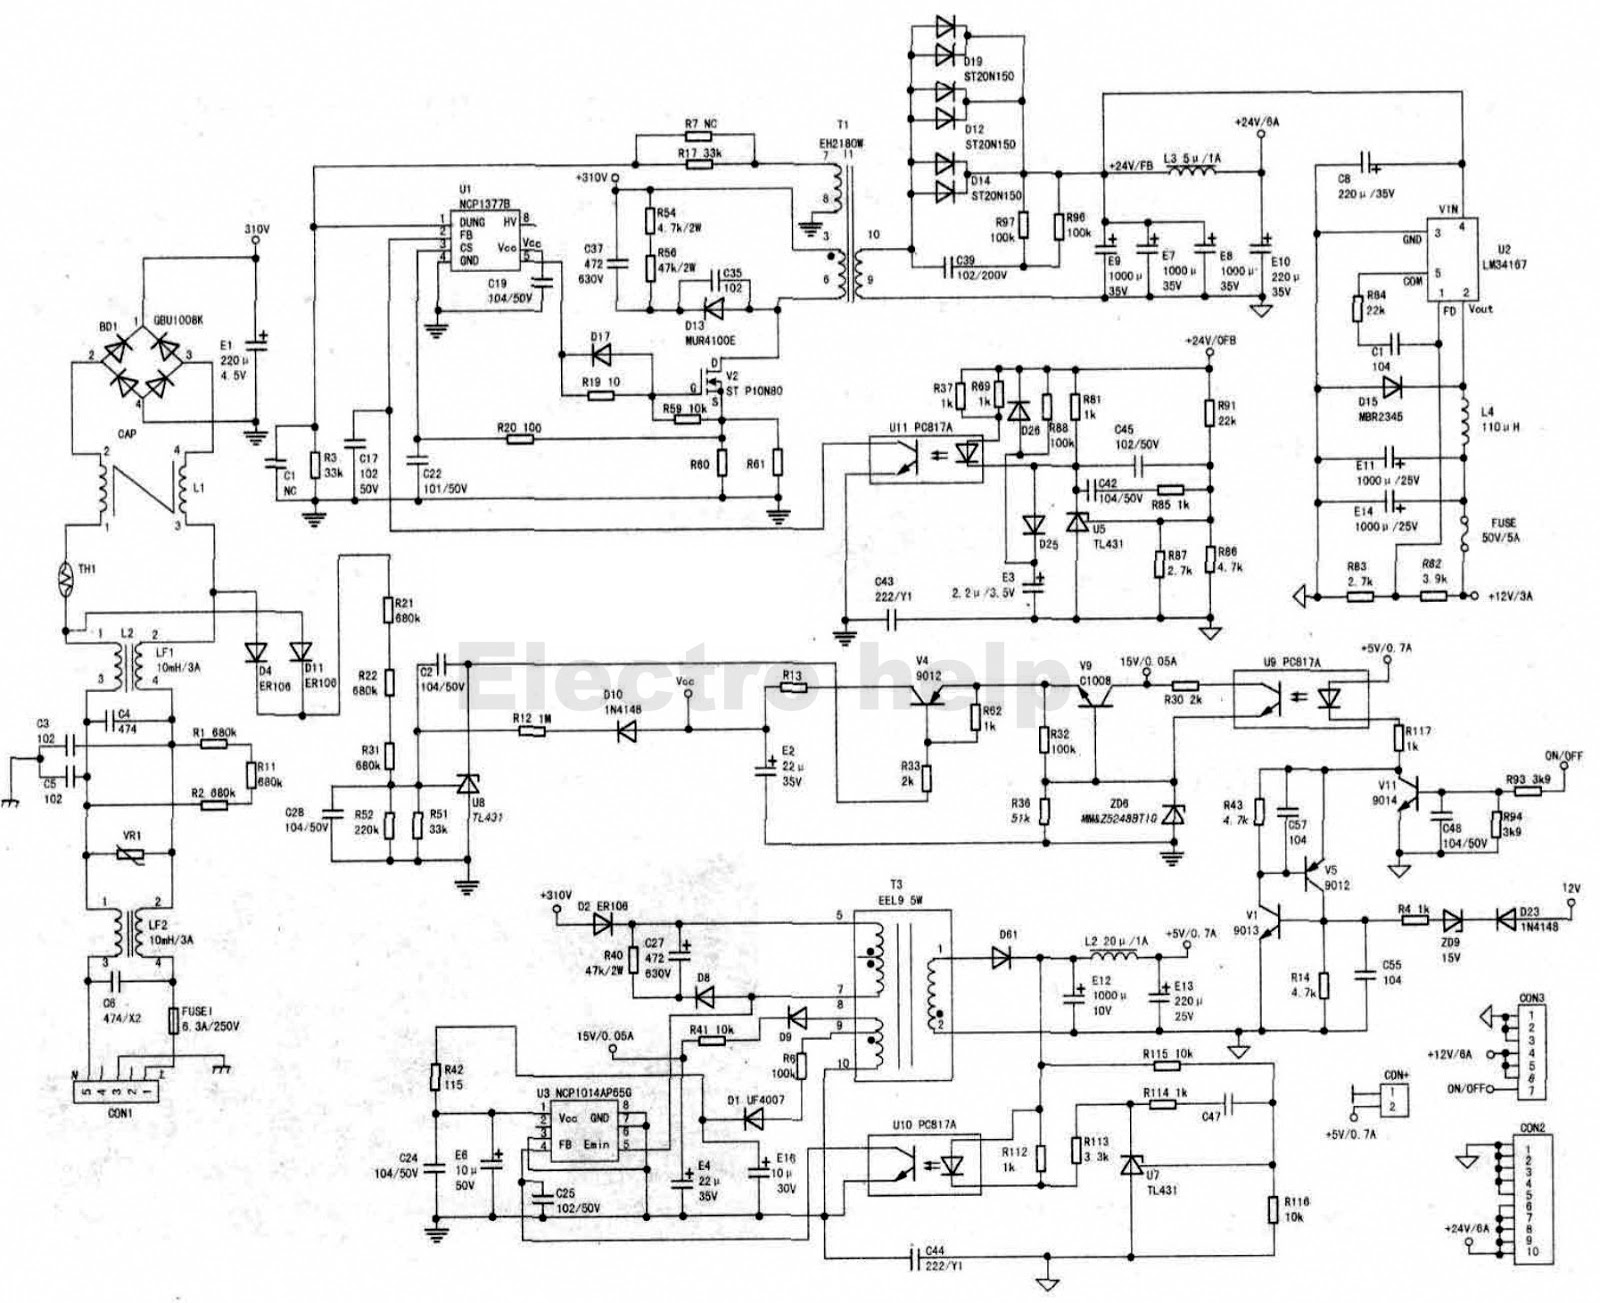 Schematic Diagrams: DPS 186CP-1 Universal LCD TV Power board Circuit